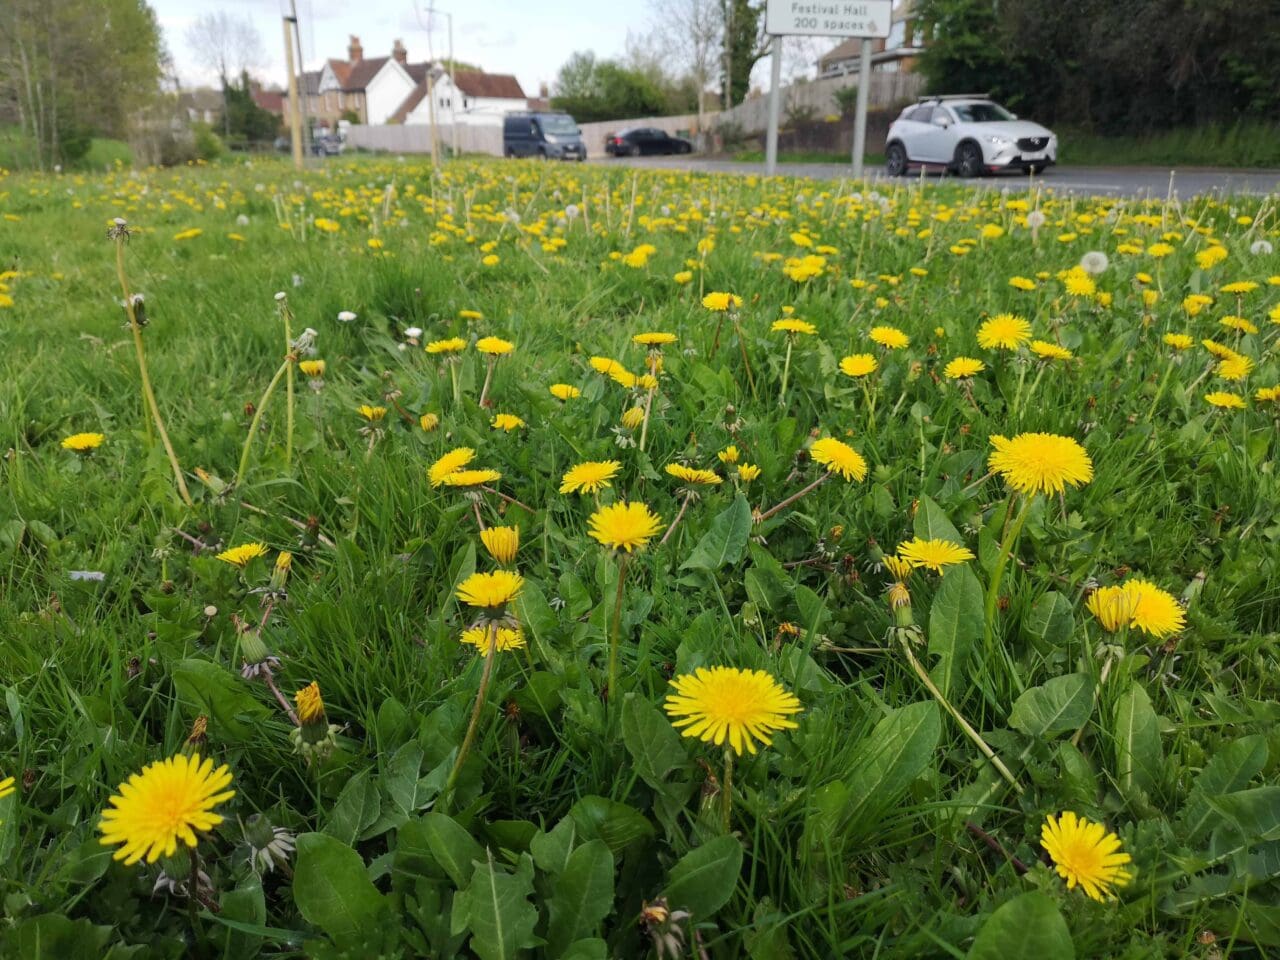 A fine show of dandelions on the approach to Petersfield next to Stoneham Park.